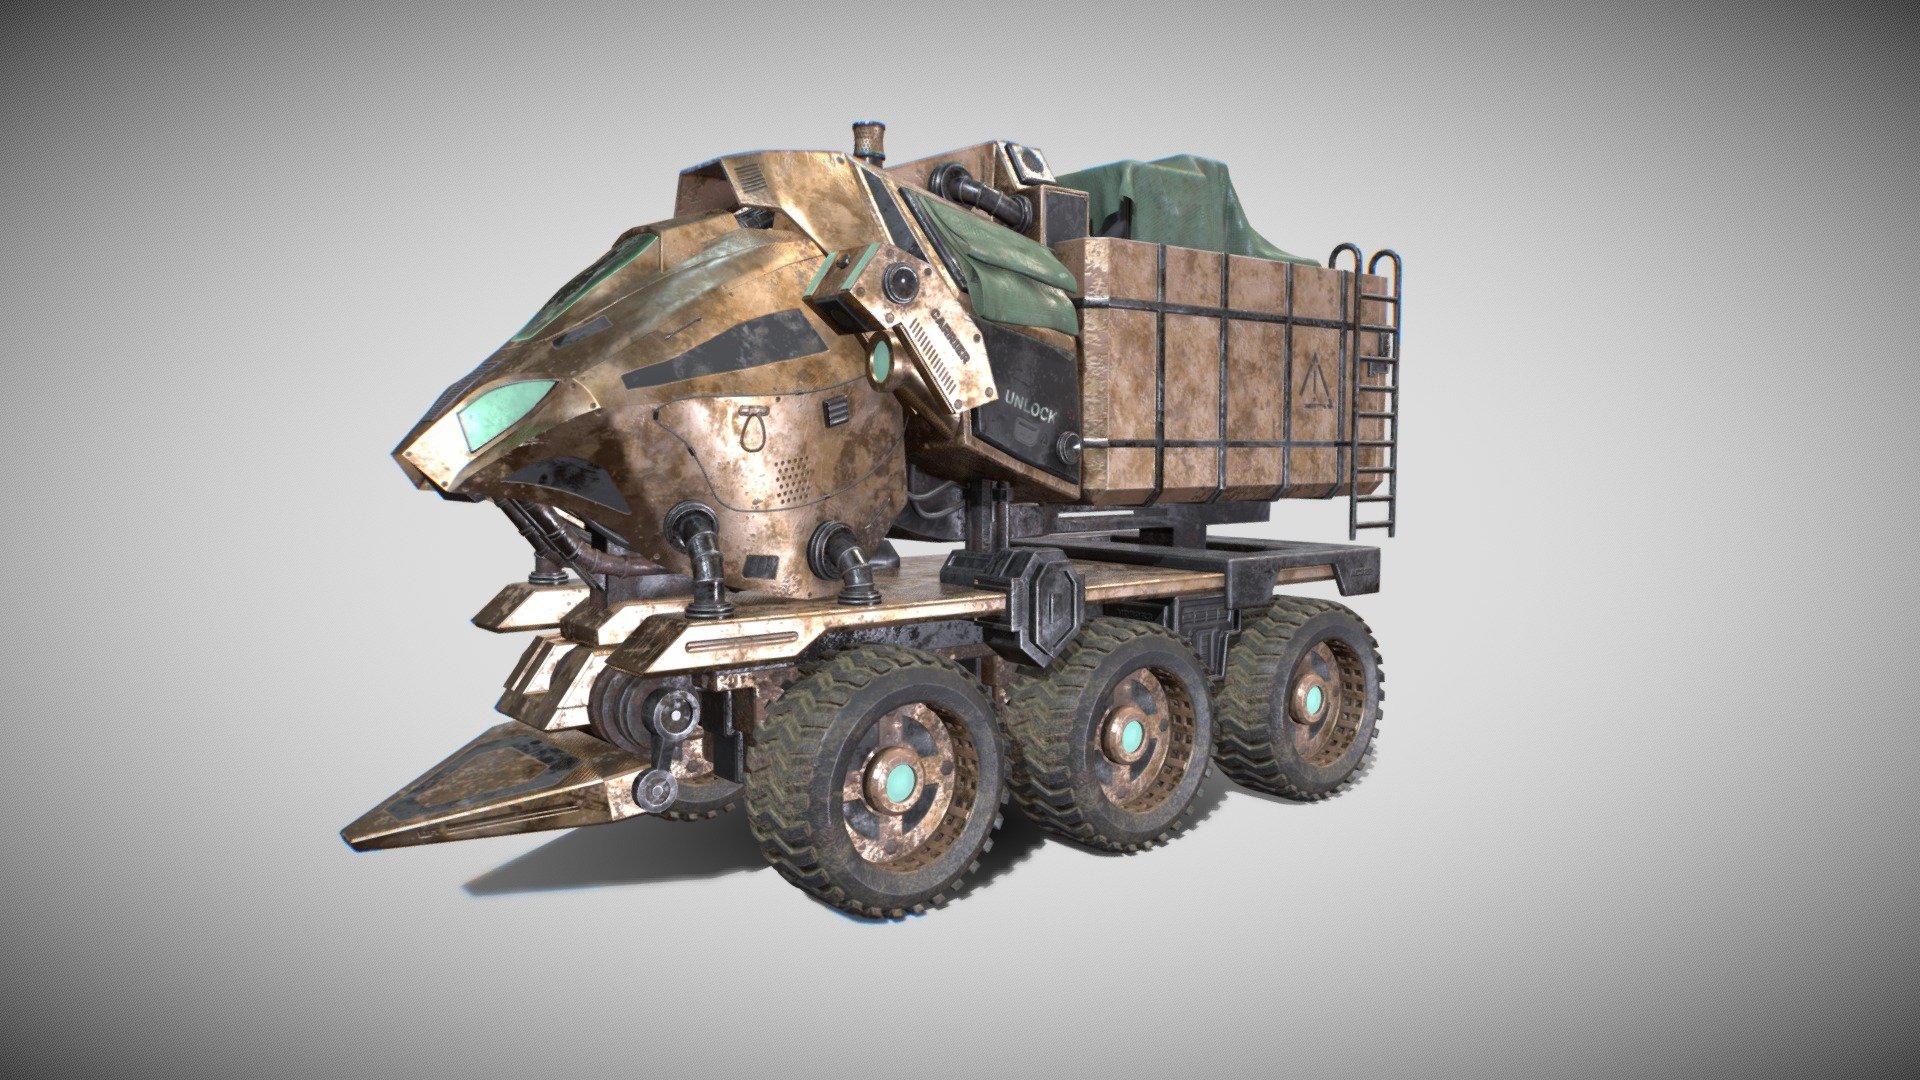 Hey everyone! I am pleased to share with you the cargo truck I made for the Rustborn project at DAE. 

Softwares used:
- Maya (Modeling / UV Unwrapping)
- Zbrush (Cloth Sculpt / Cleanup)
- Substance Painter (Texturing)
- Photoshop (Custom Decals) - Rustborn N23 Cargo Carrier - 3D model by JelleMoes 3d model